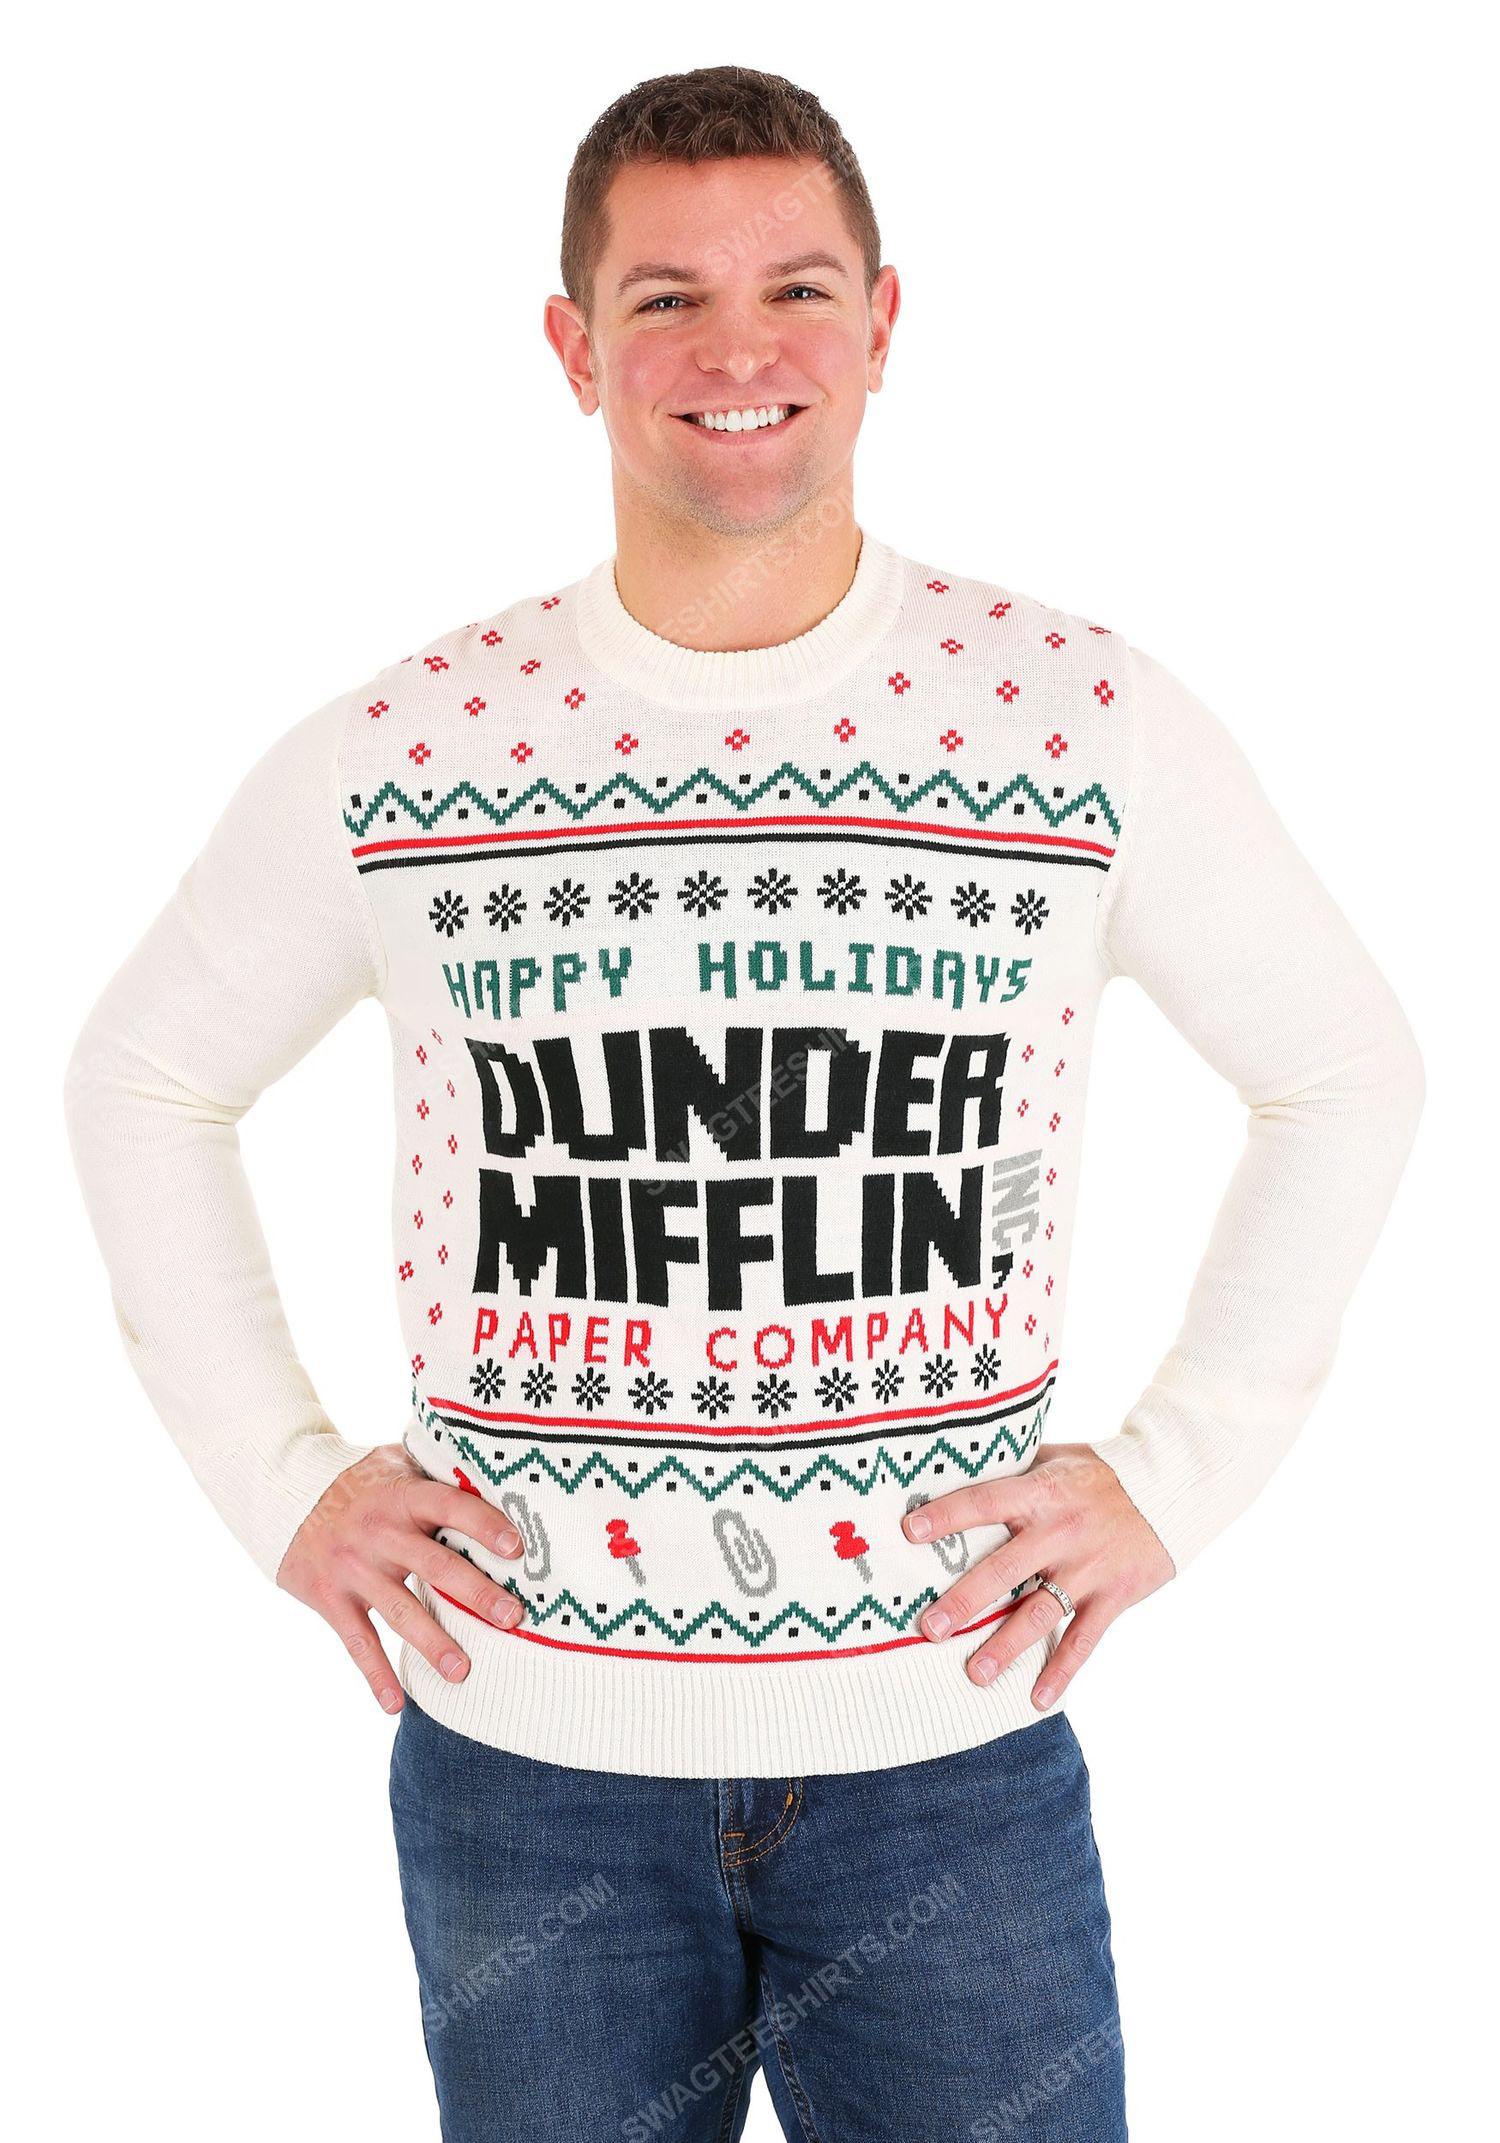 The office happy dunder mifflin paper company full print ugly christmas sweater 2 - Copy